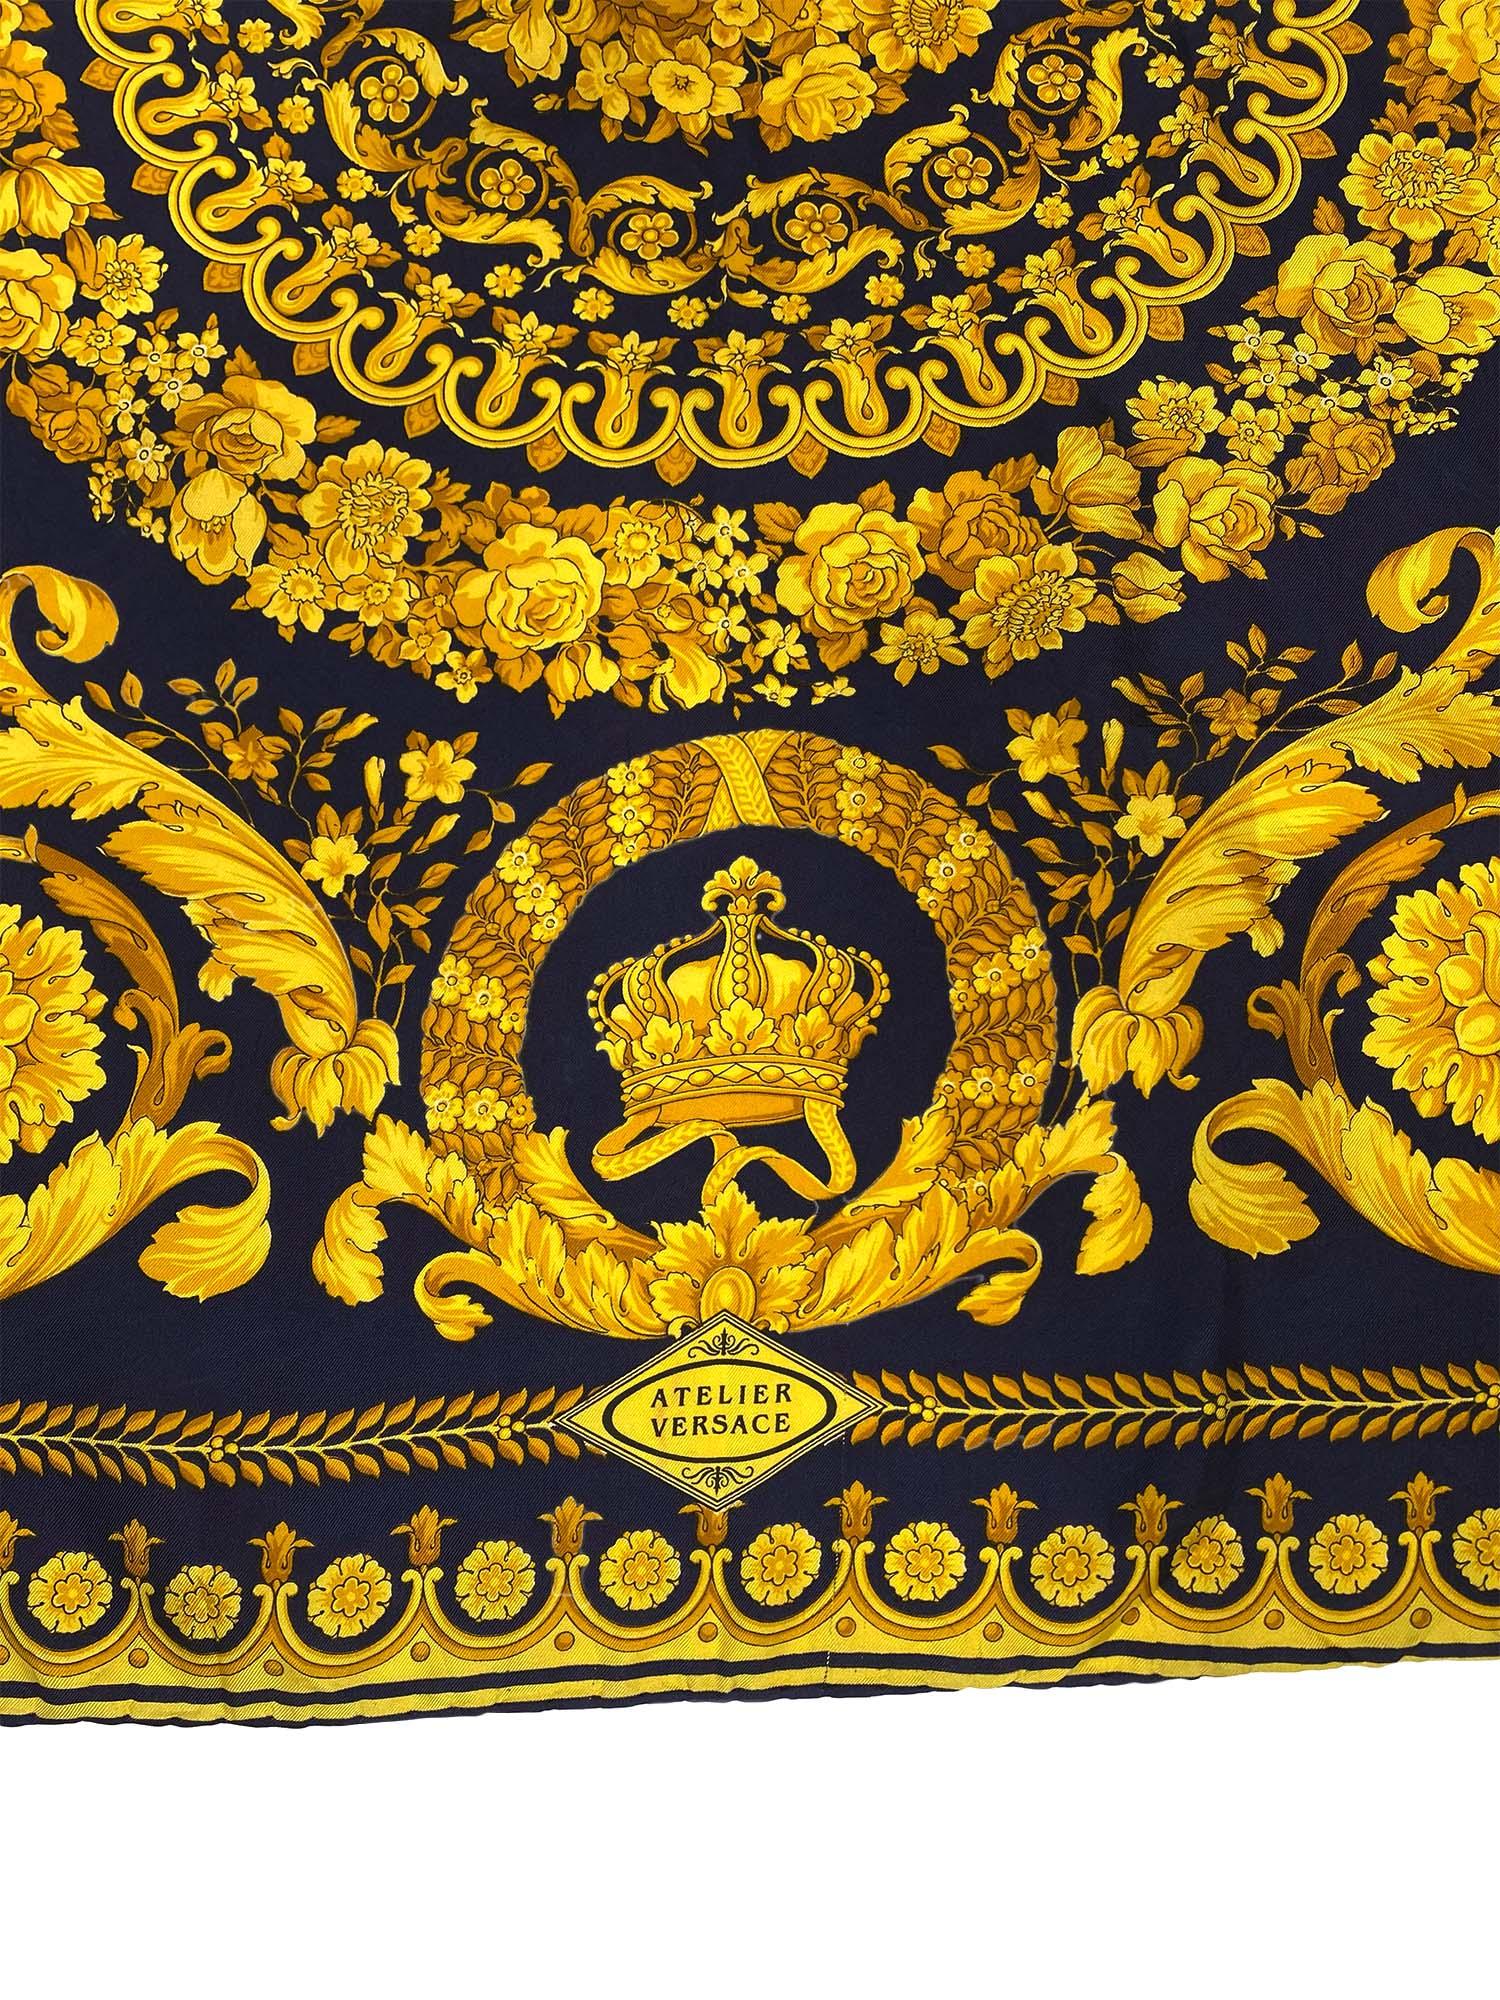 Presenting a beautiful baroque Atelier Versace square silk scarf, designed by Gianni Versace. This scarf features a classically gold Versace floral baroque pattern atop a navy background with crowns and an Atelier Versace logo.